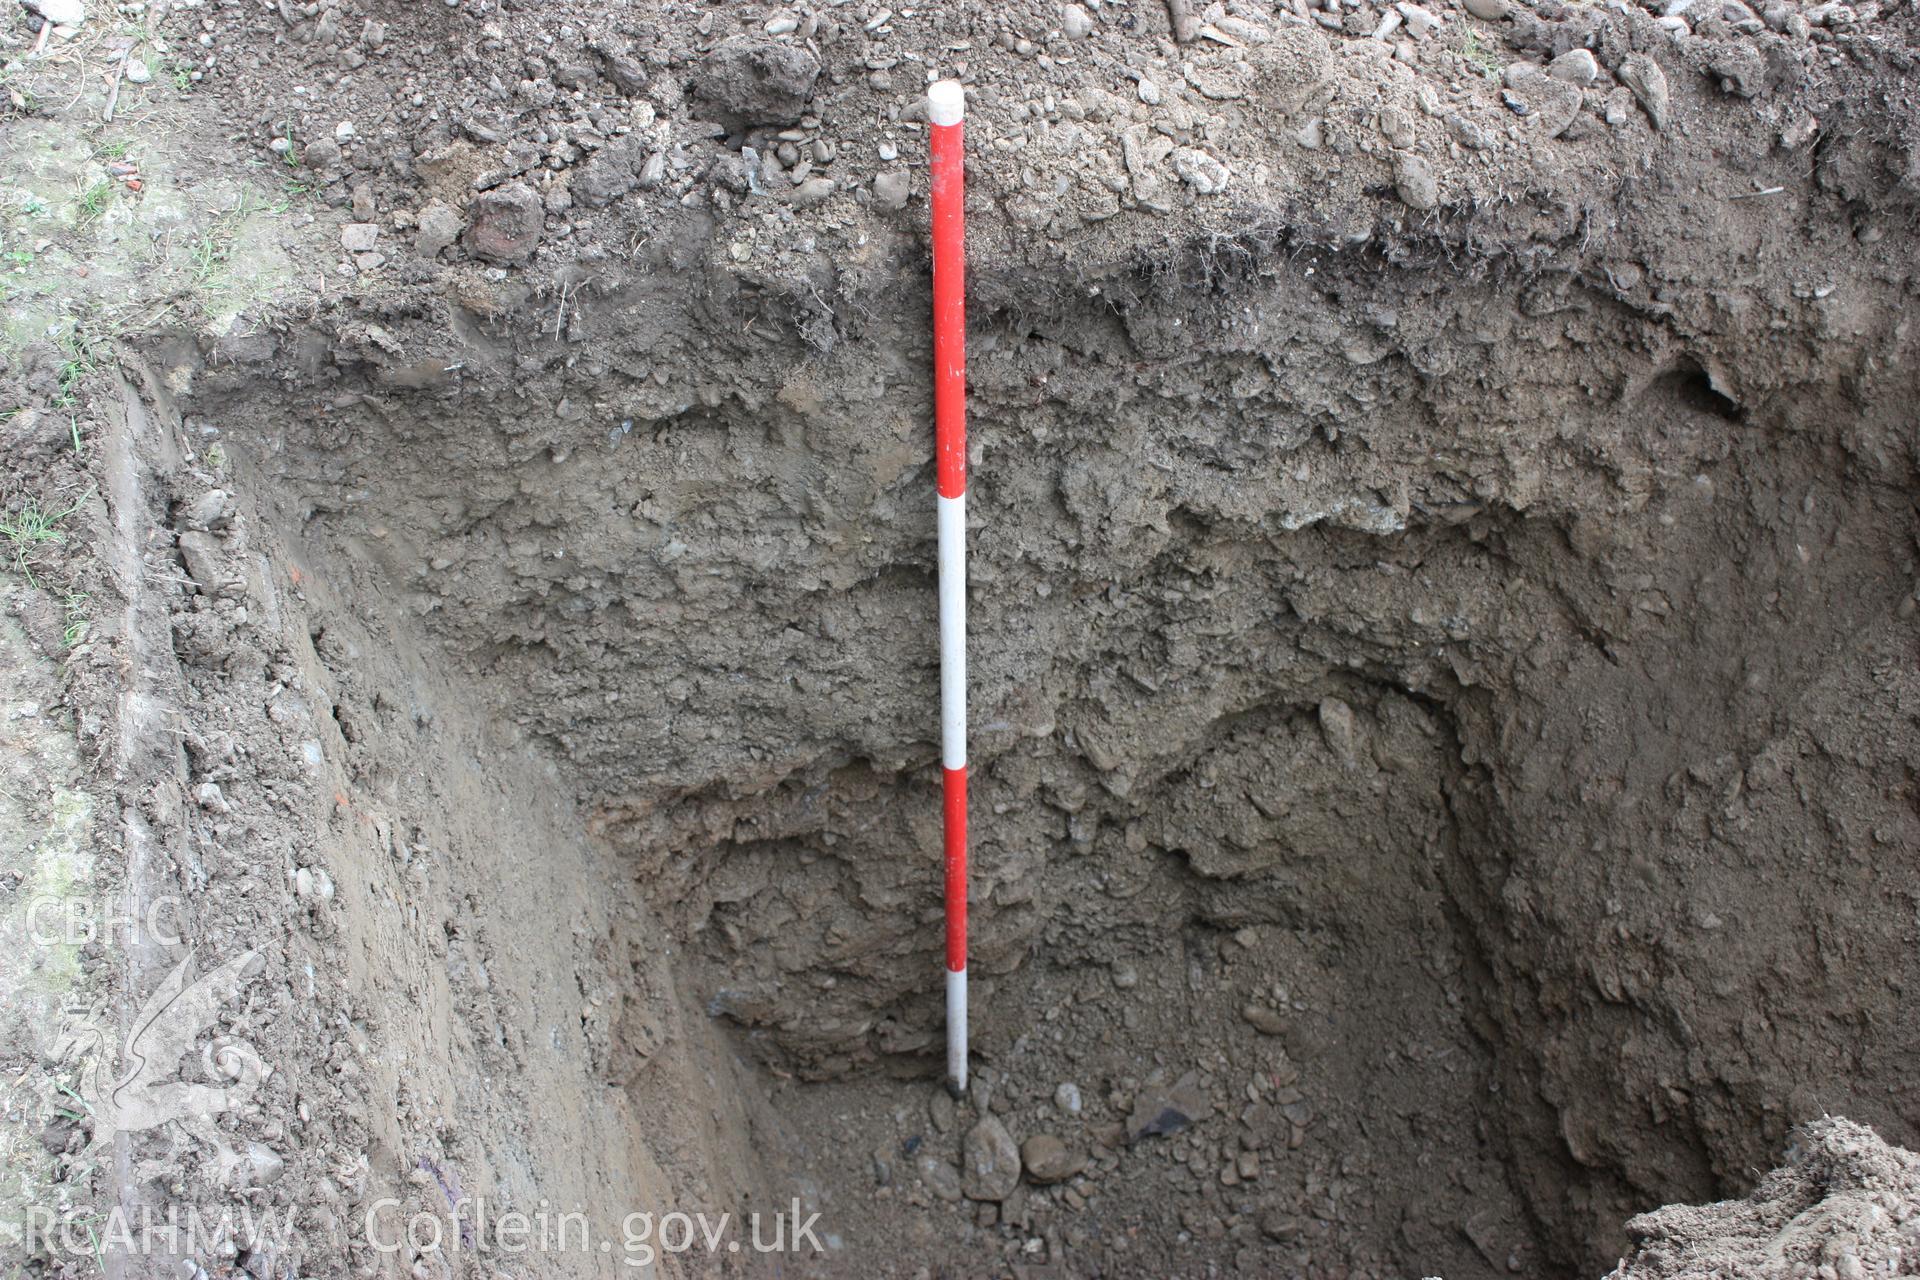 Digital photograph showing Sondage 1 in swimming pool development area - part of archaeological field evaluation at Trawscoed Mansion, Trawscoed, produced by Cambrian Archaeological Projects Ltd.